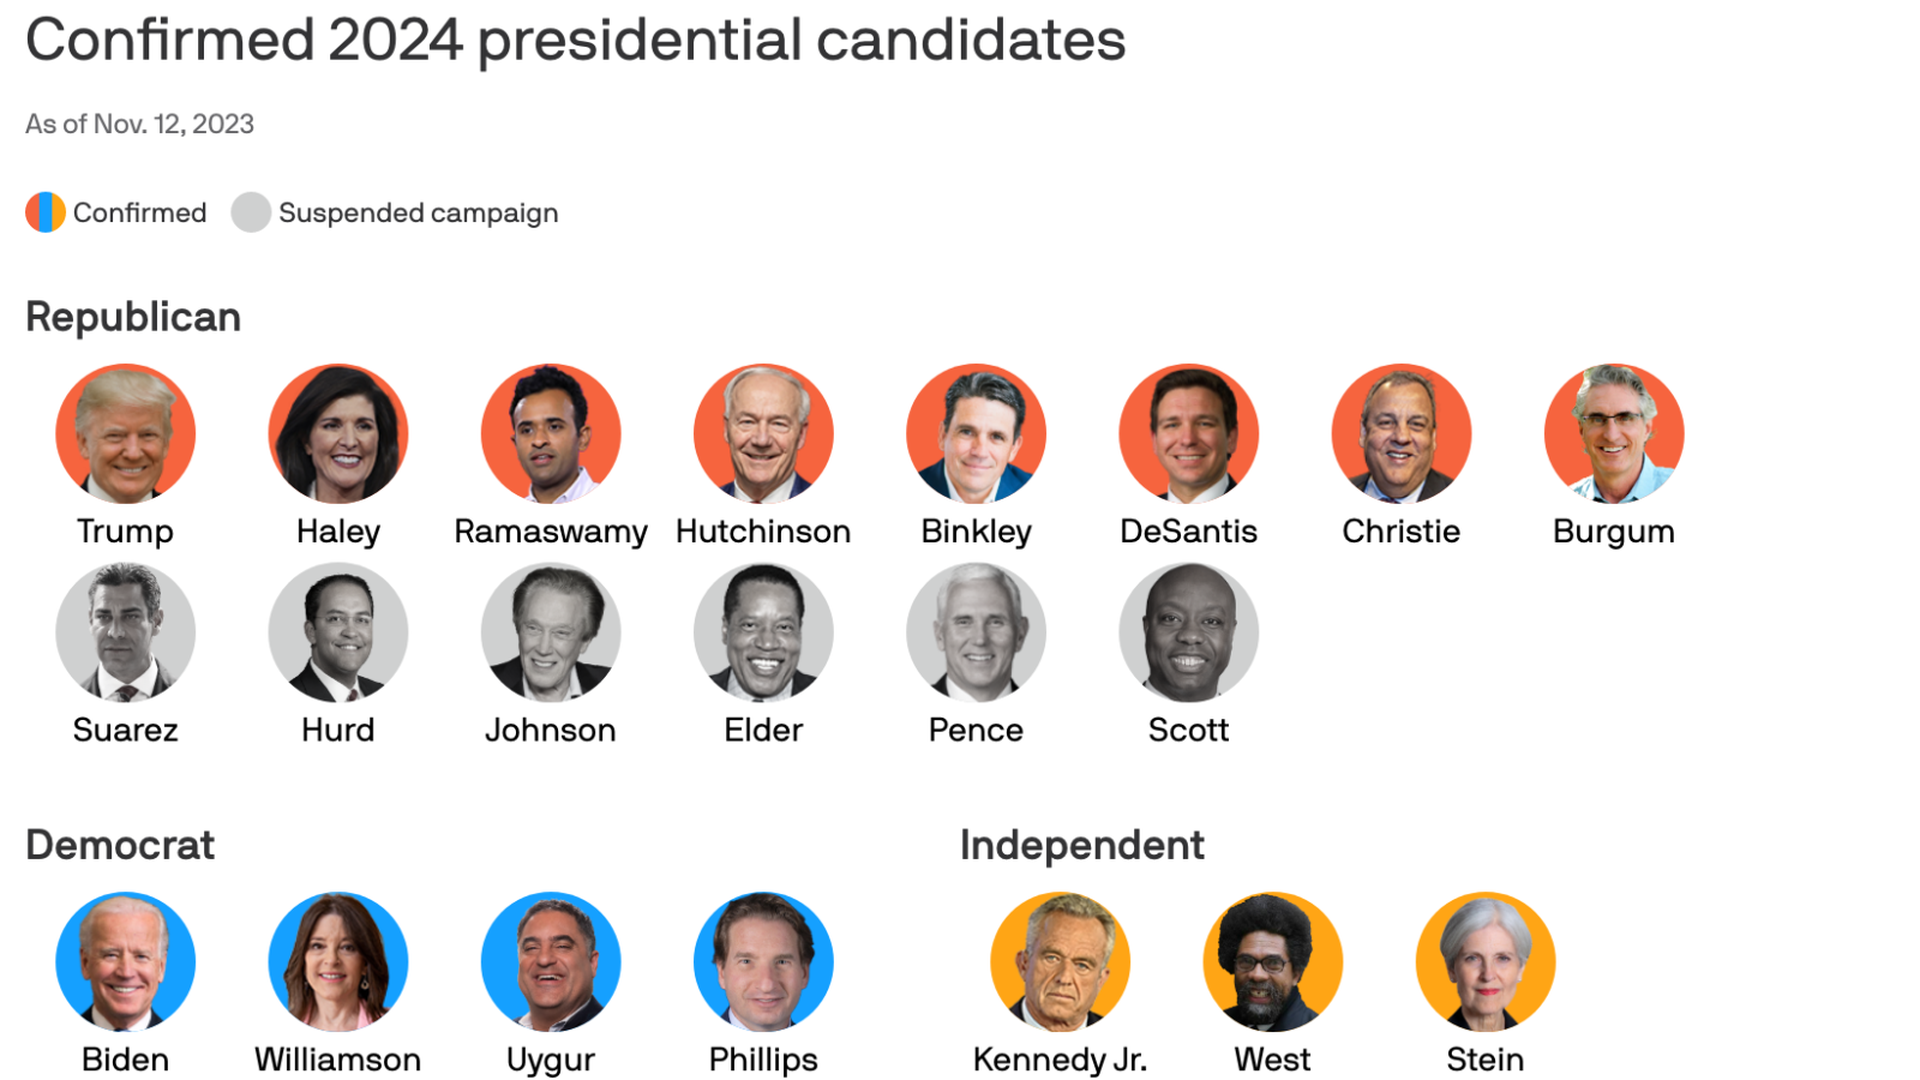 How voters feel about the 2024 candidates so far